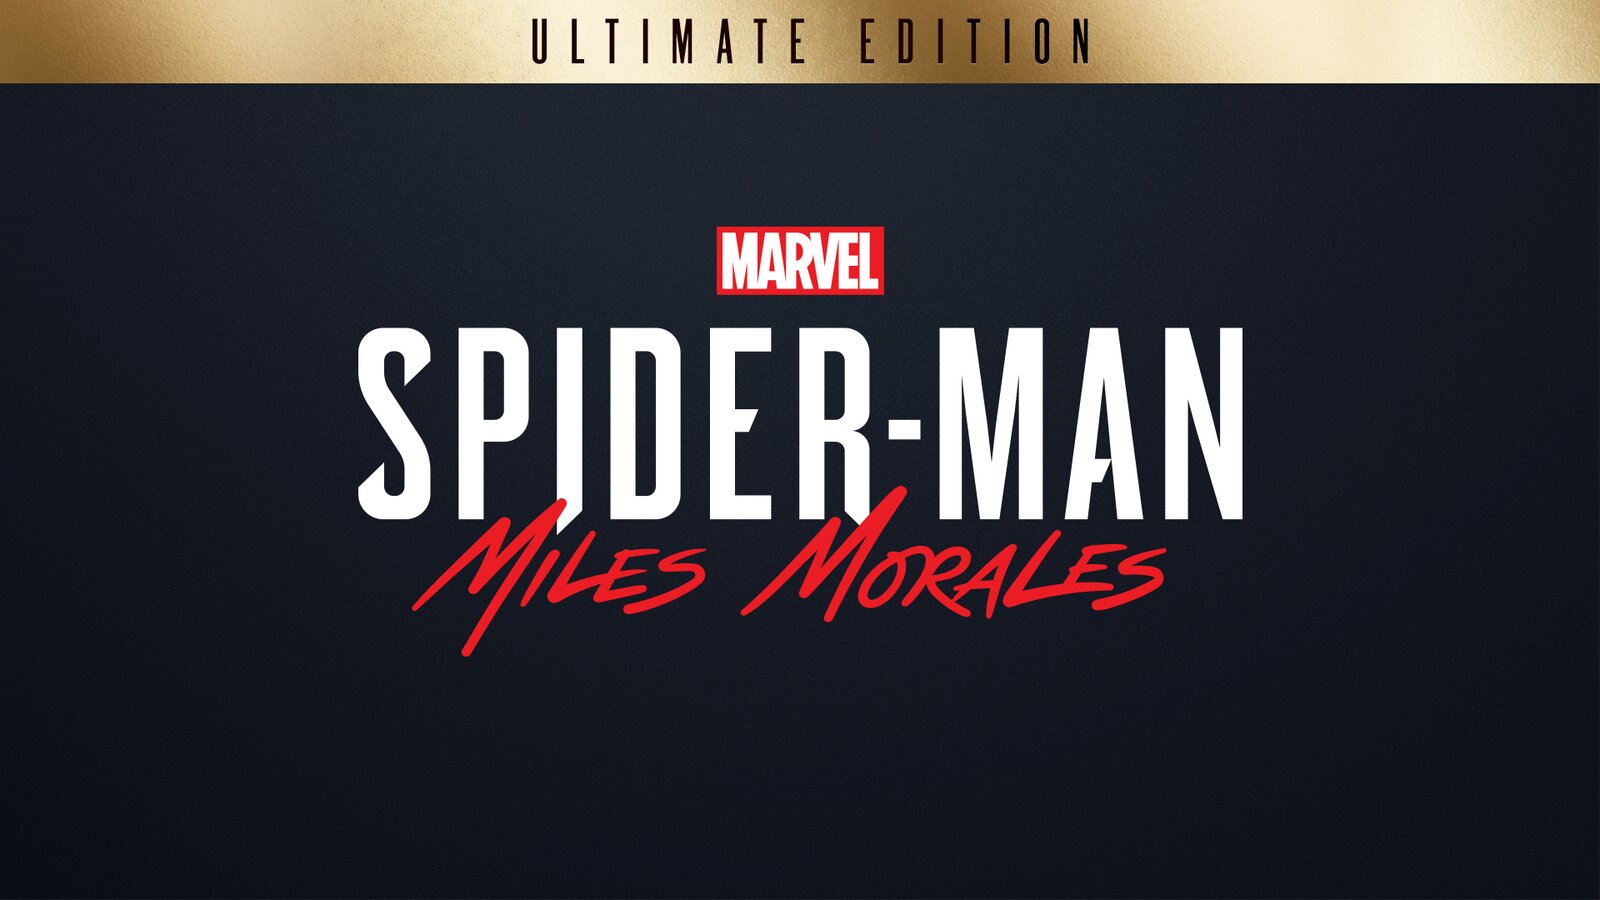 Marvel's Spider-Man: Miles Morales - Ultimate Edition